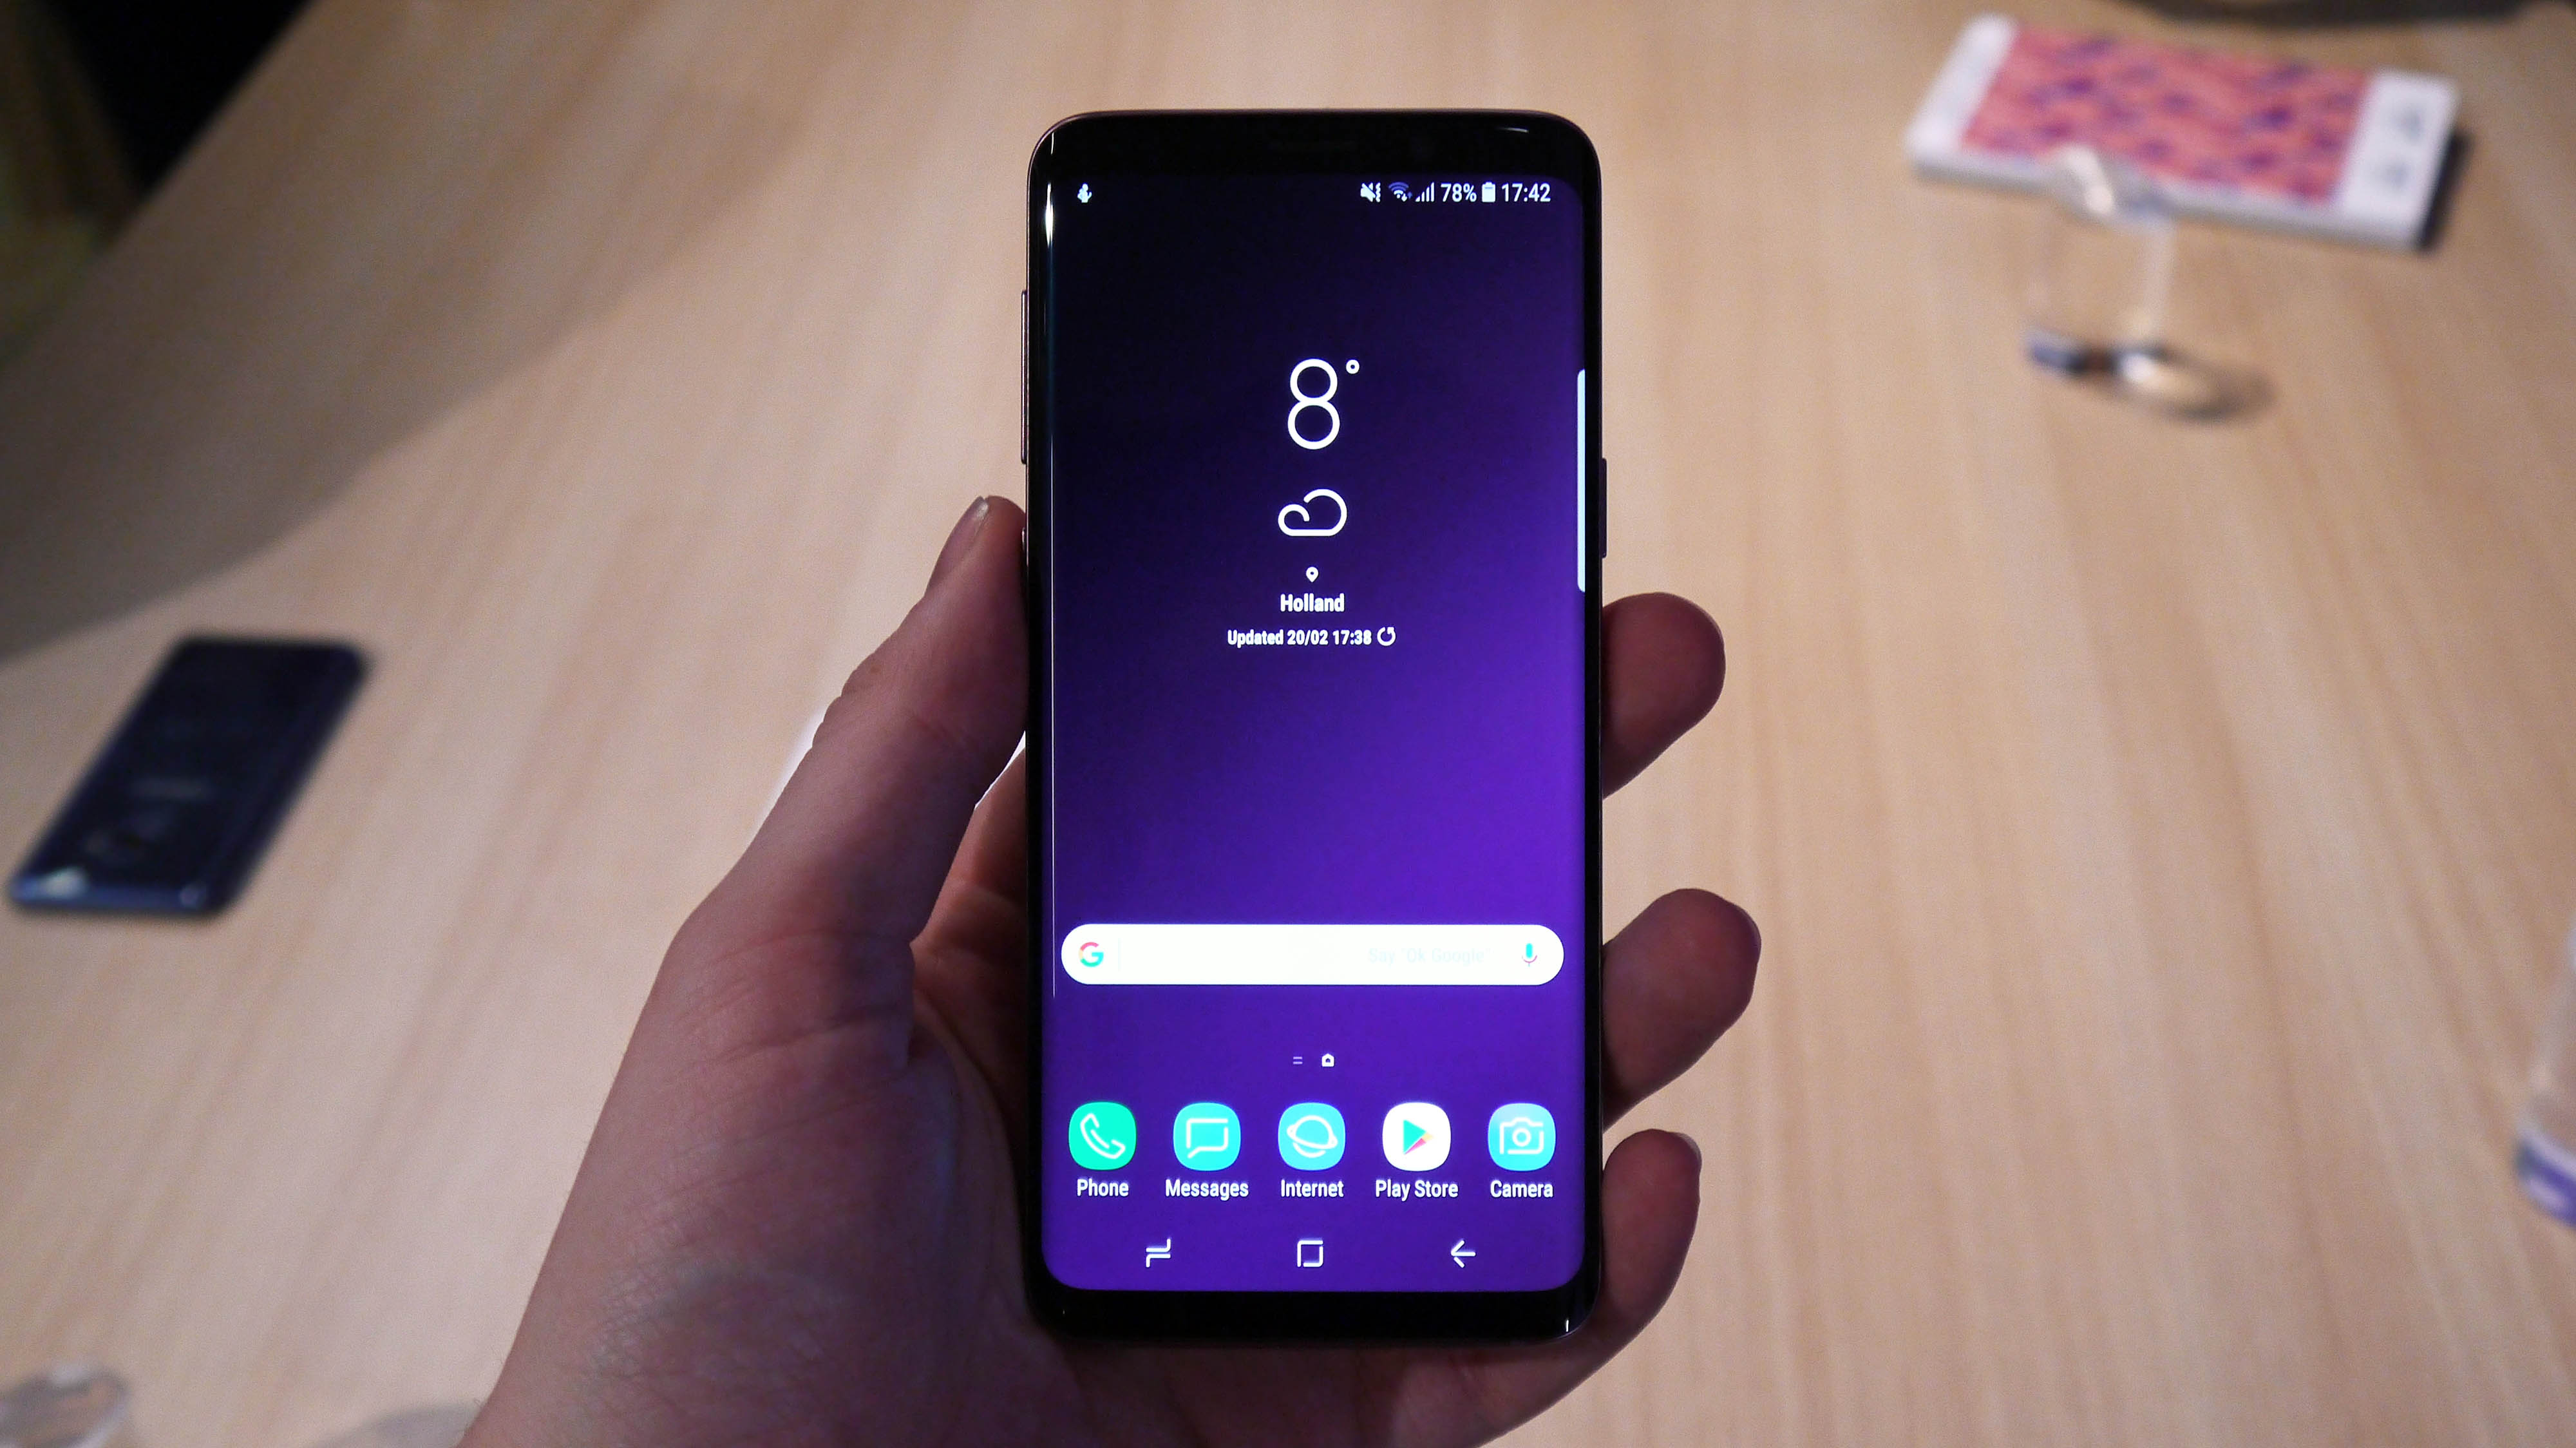 How To Fix Galaxy s9 Freezing And Restarting Issue? - KrispiTech